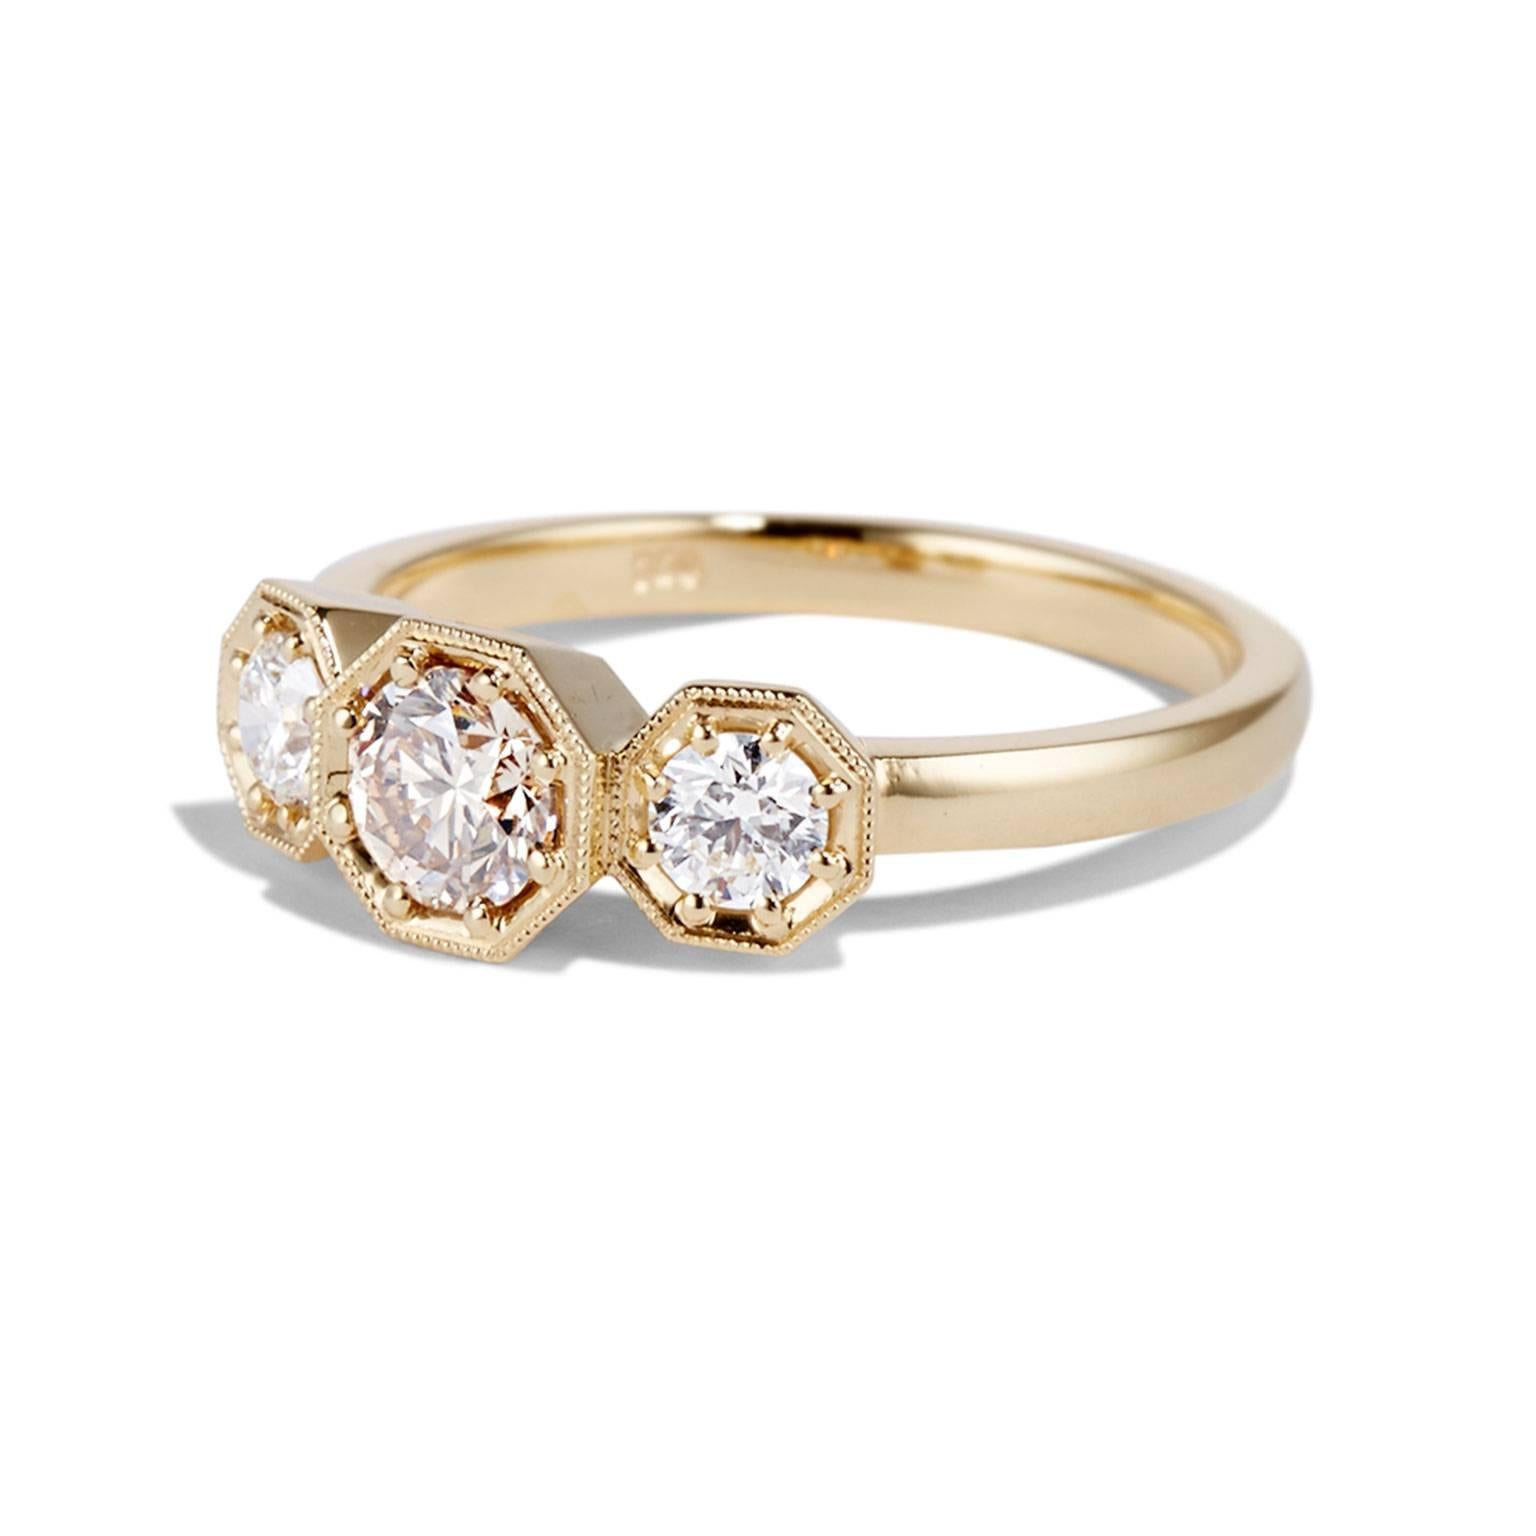 Featuring three diamonds, the Cushla Whiting's Clara ring is a pretty take on the classic triple stone engagement style. A trio of round stones sparkle in a gold, hexagonal setting.

The CLARA ring is made in 18 karat gold holding a 0.50 carat